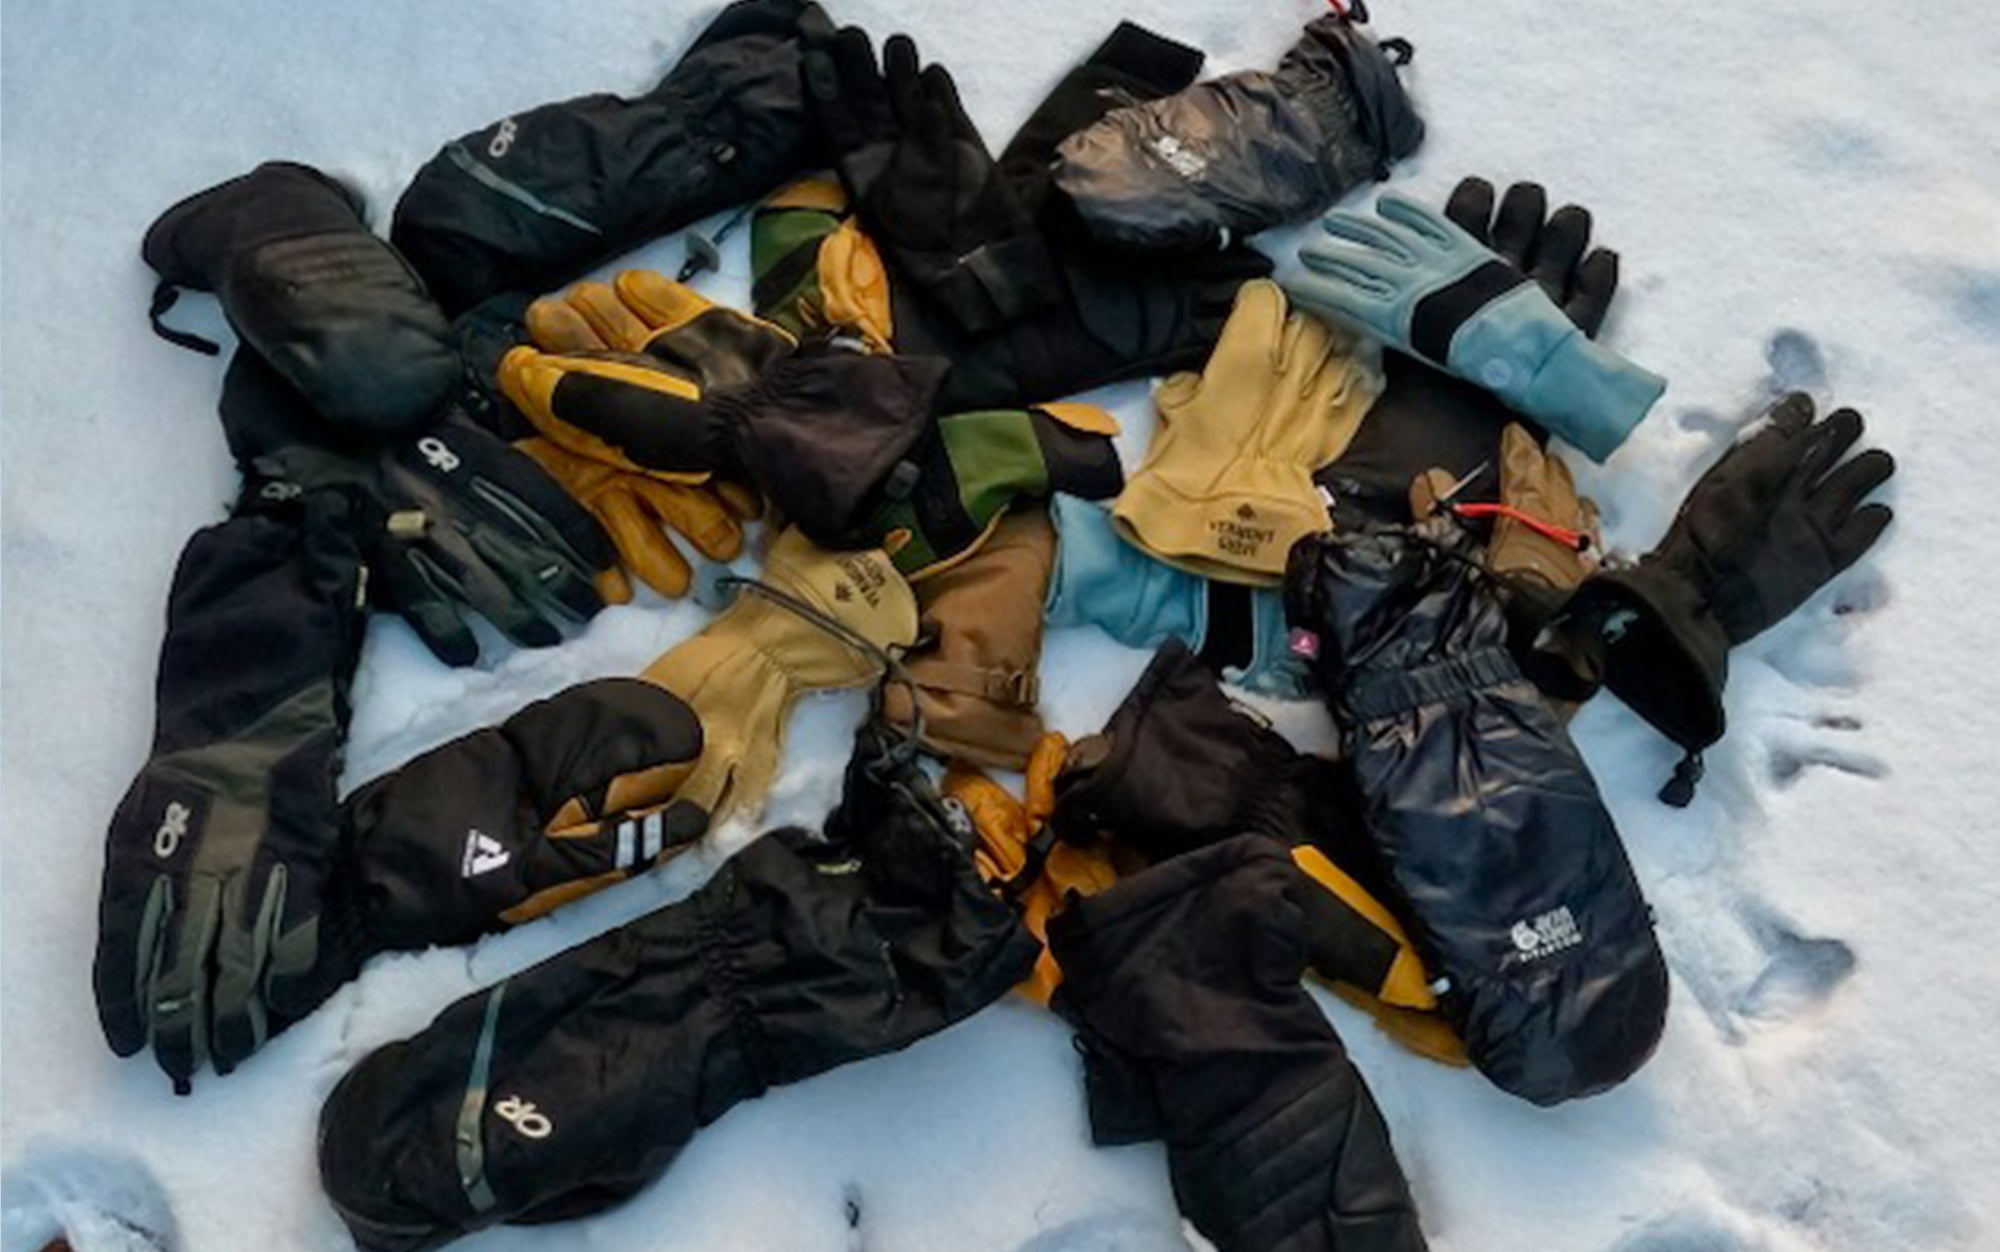 The best winter gloves sit in a pile.